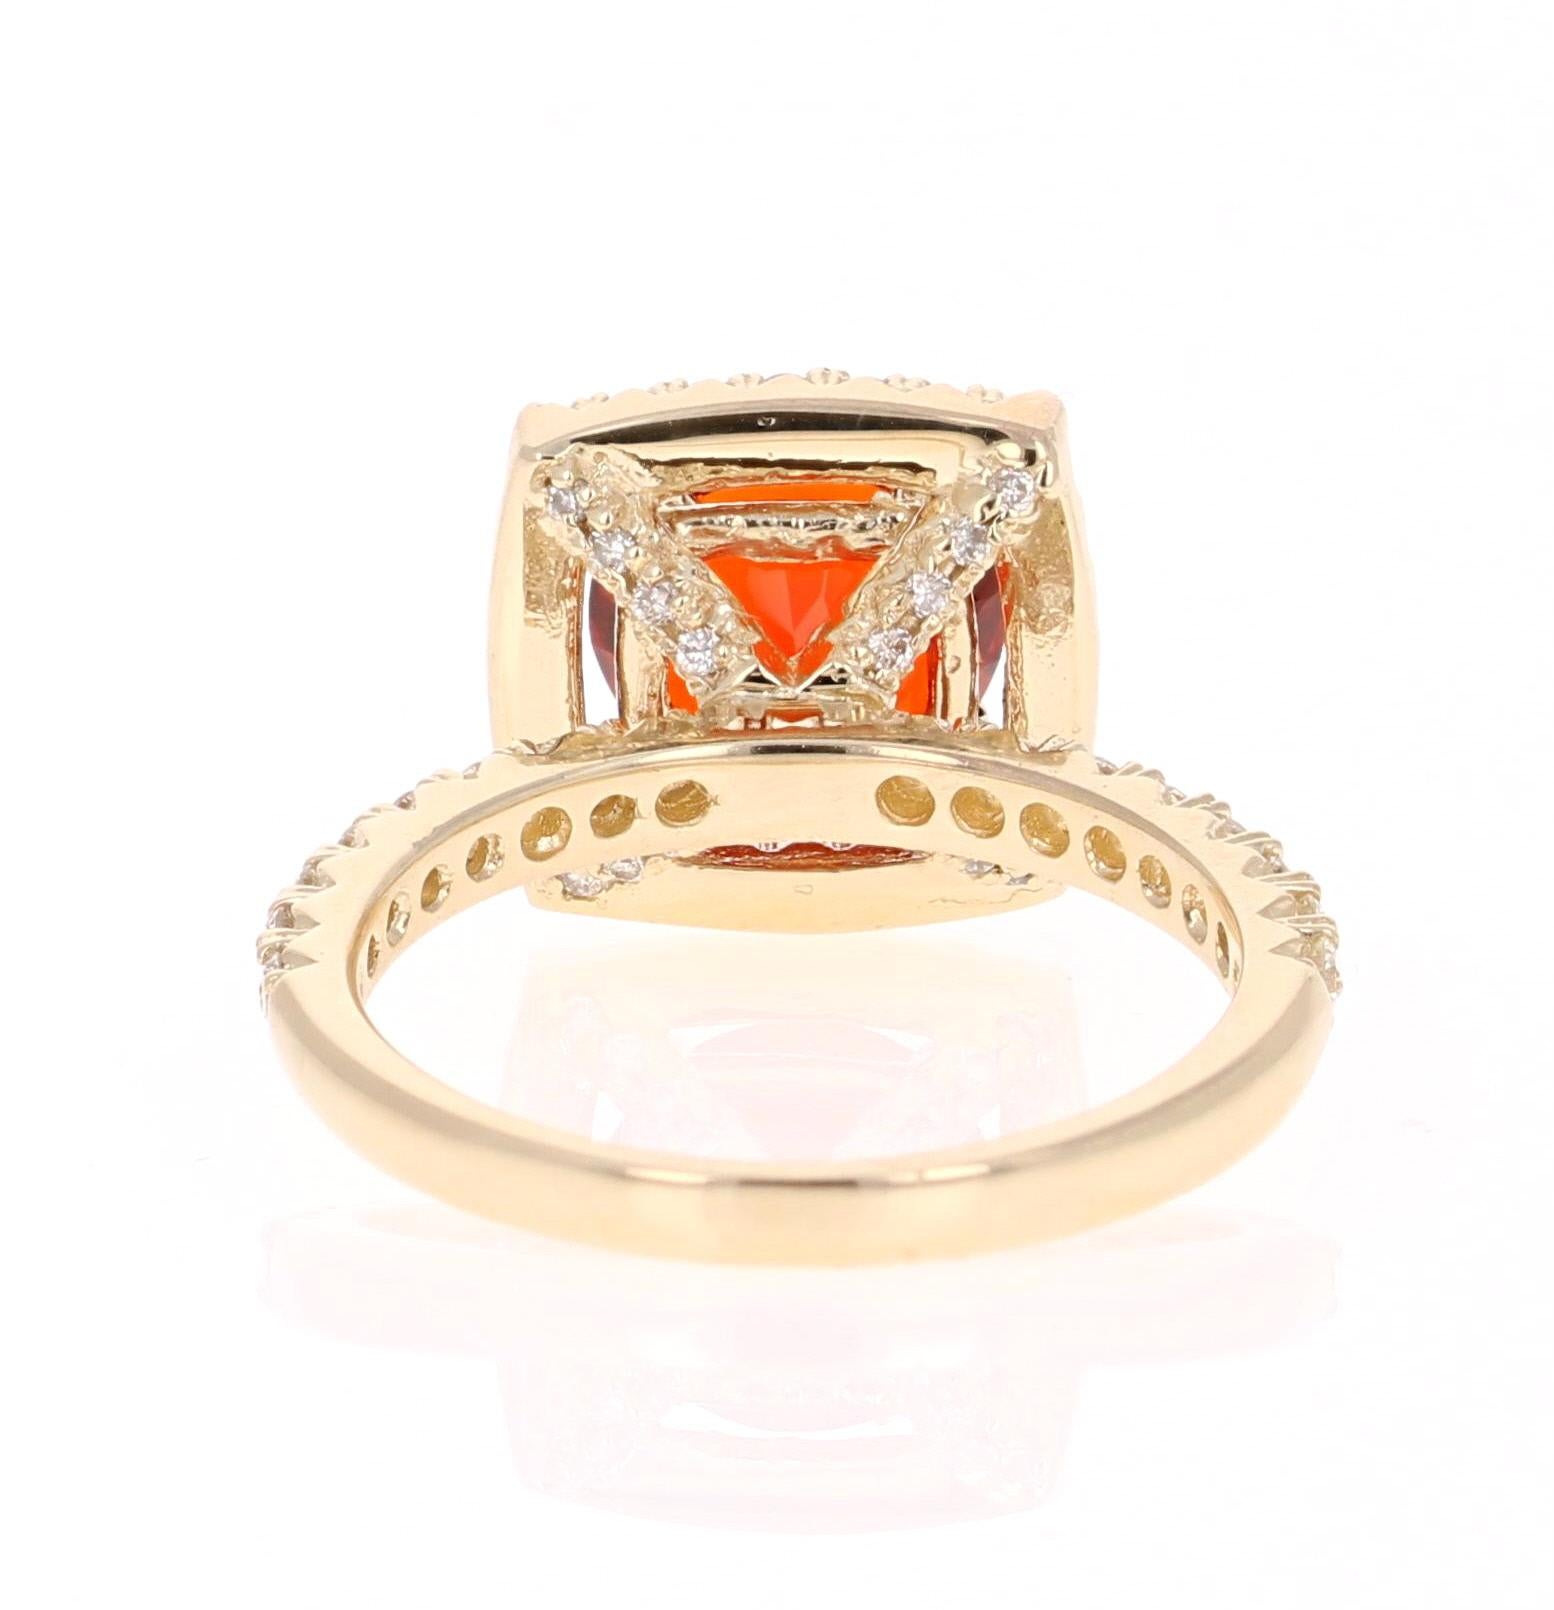 Round Cut 2.09 Carat Fire Opal Diamond Cocktail Yellow Gold Ring